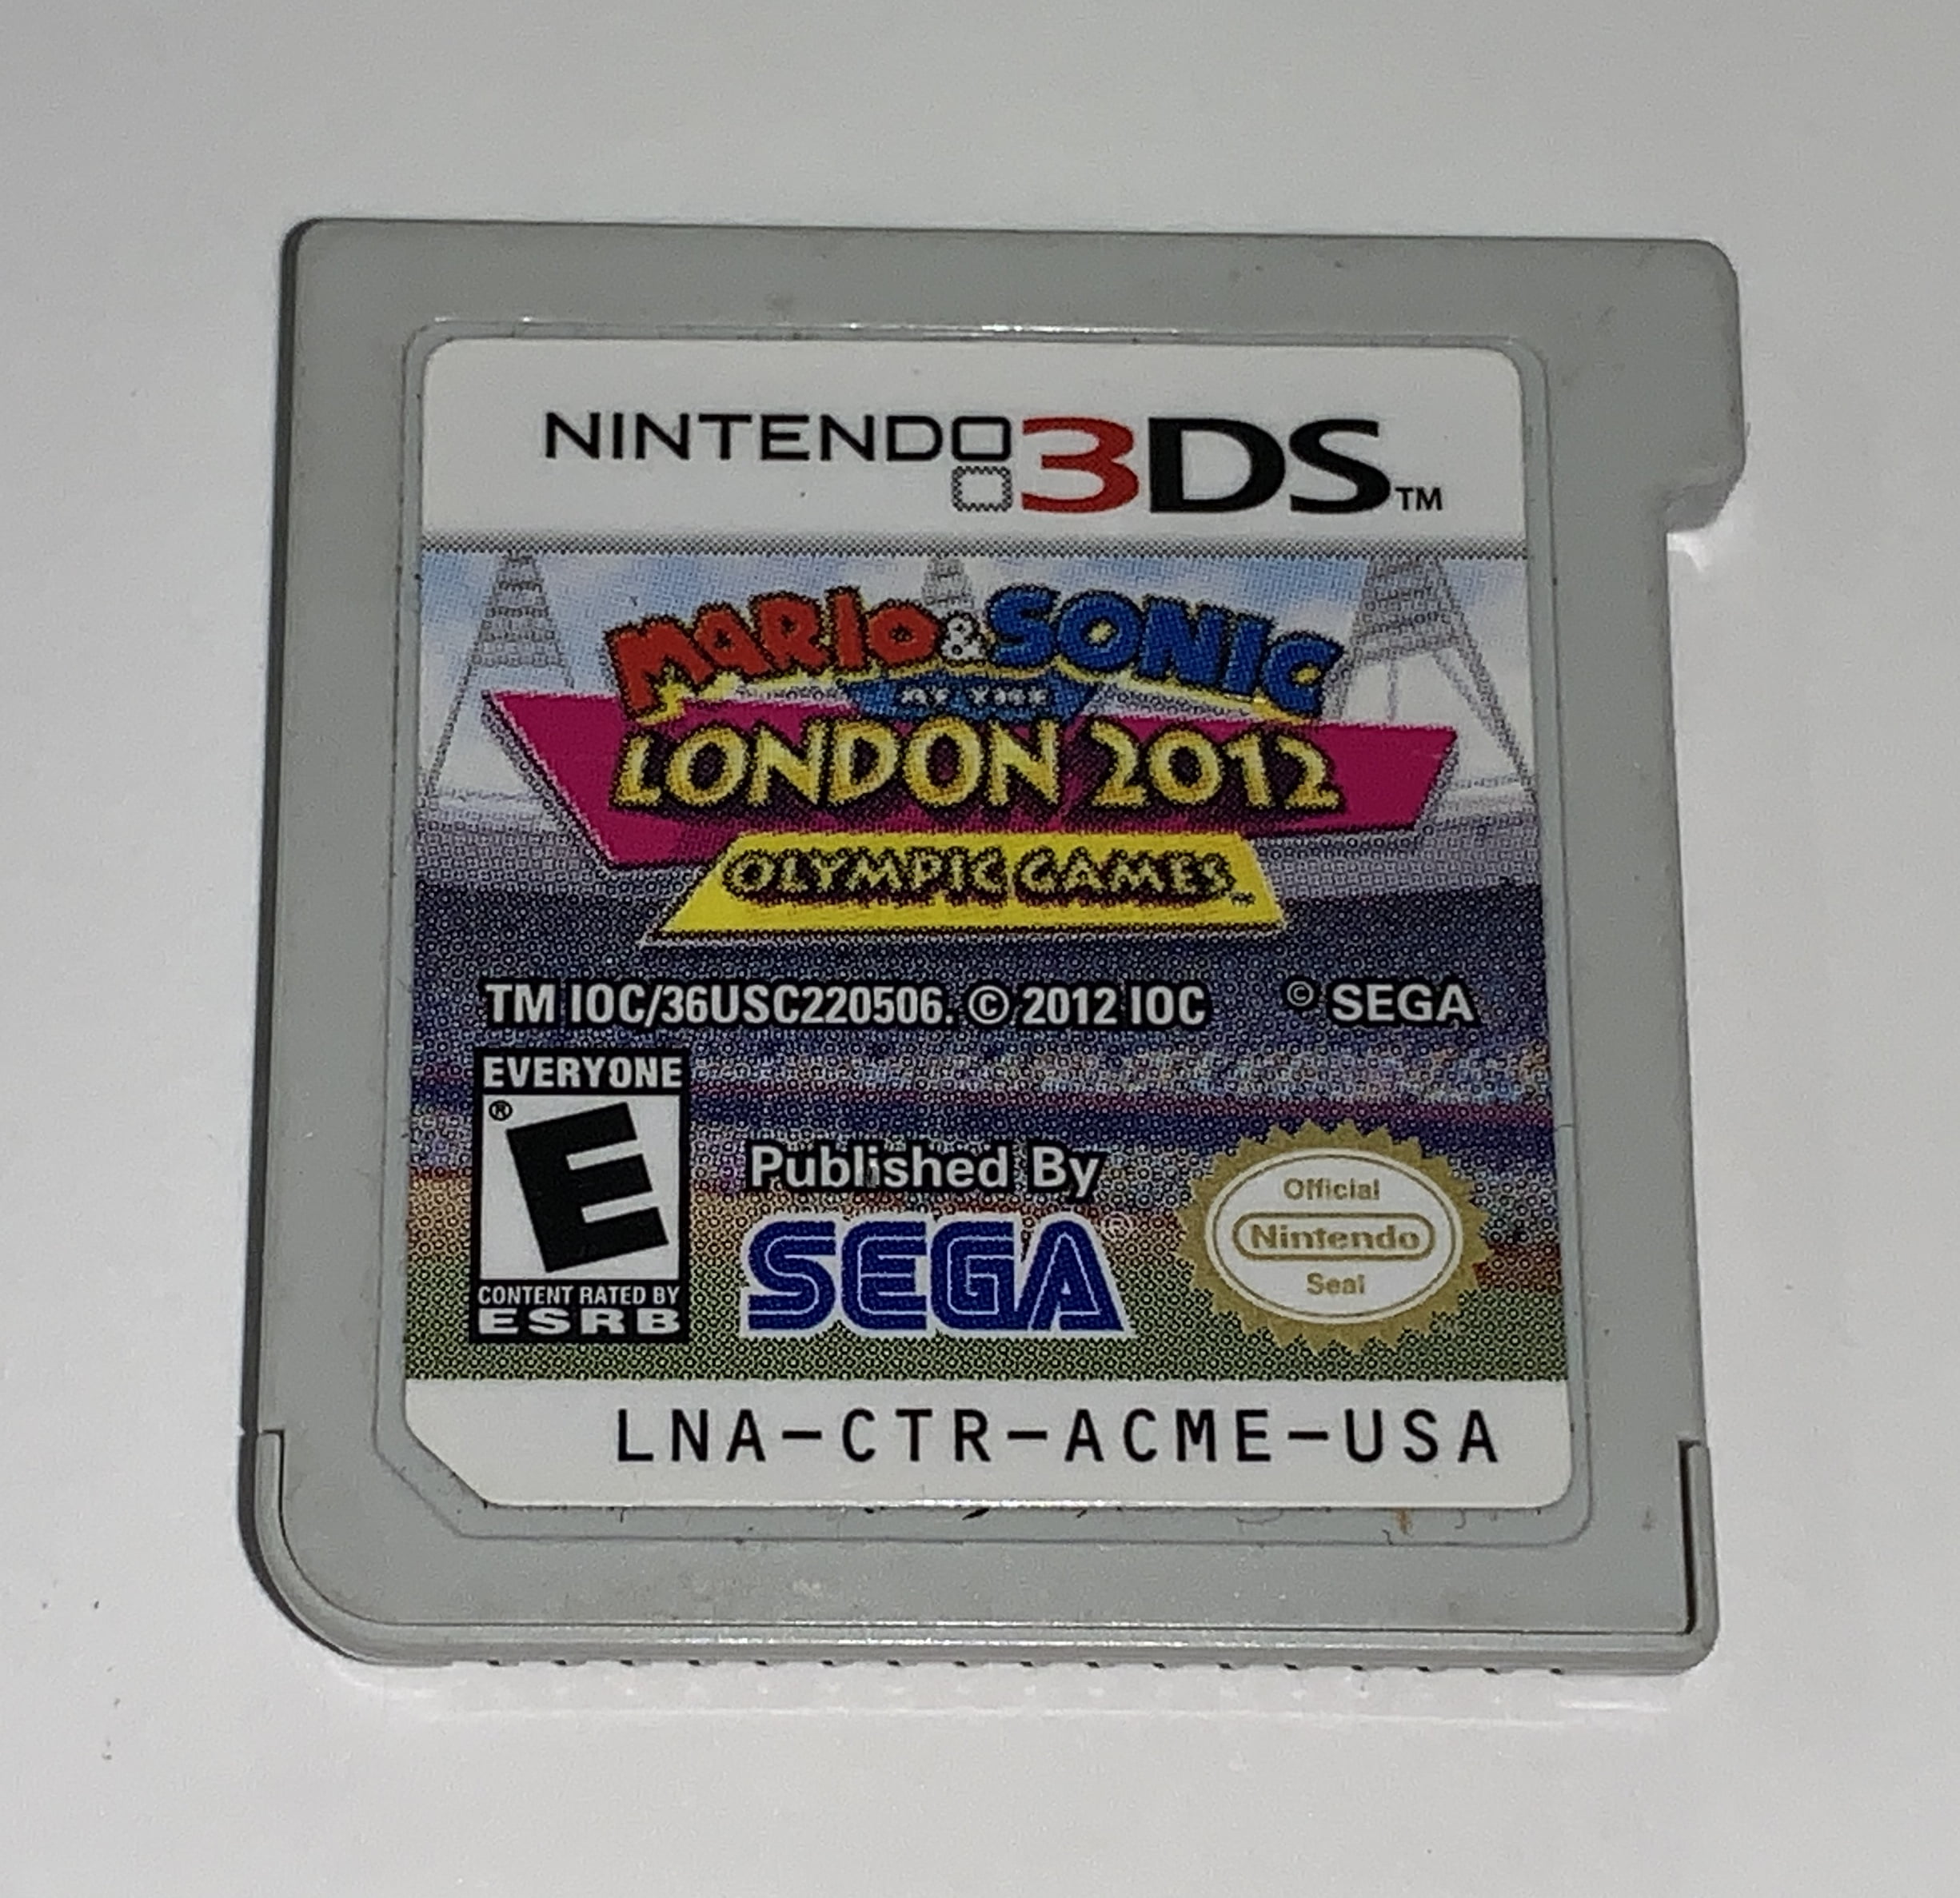 Nintendo DS Games - Over 200 to Choose from inc Mario Sonic